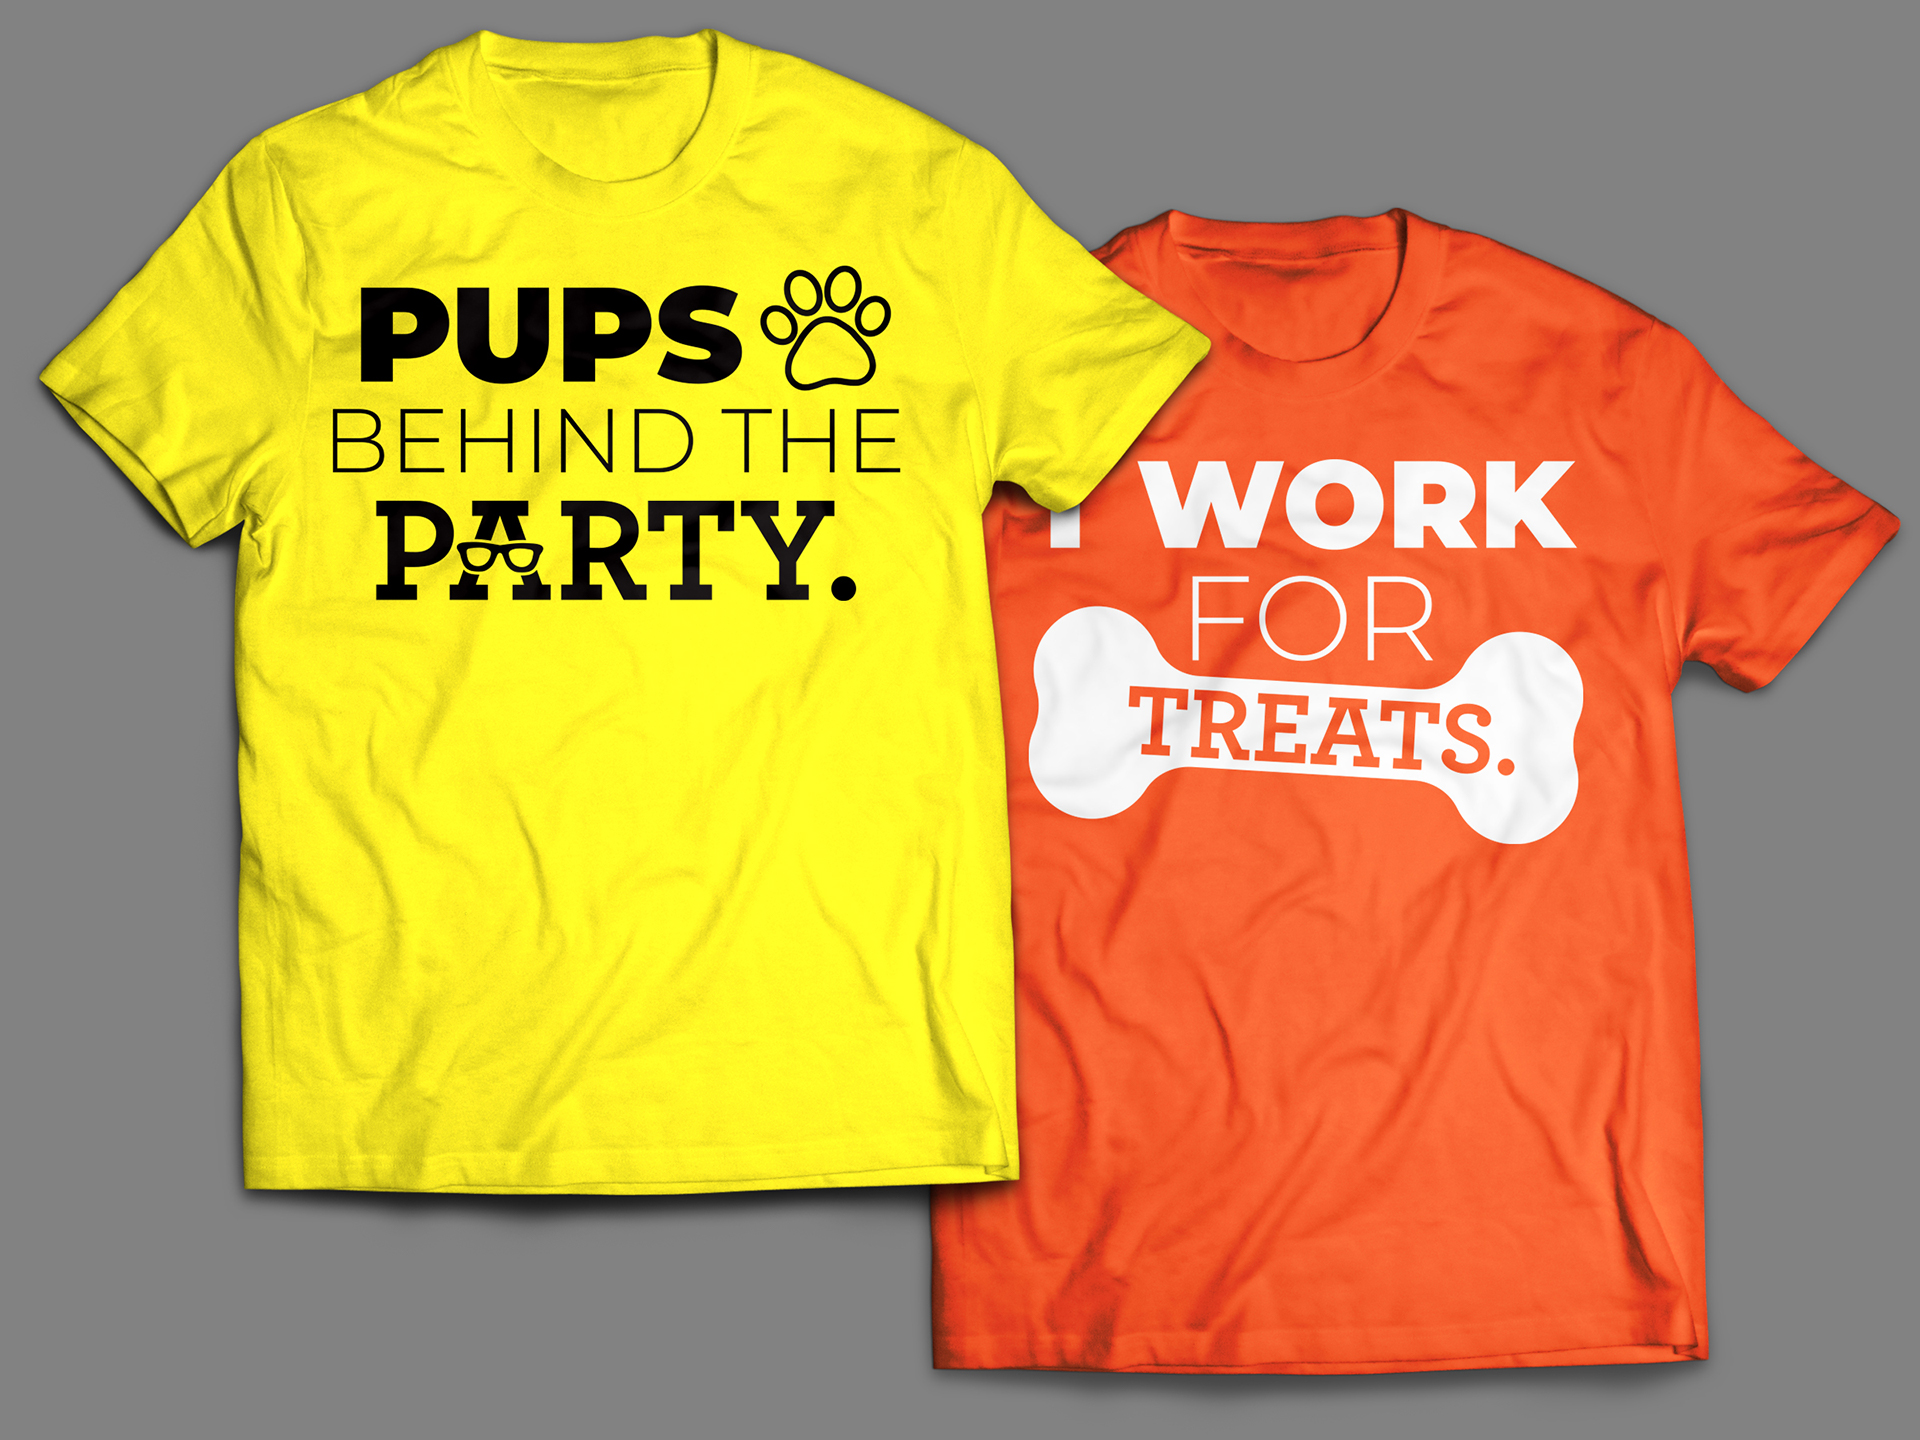 Turn Up With Your Pup Event T-Shirts